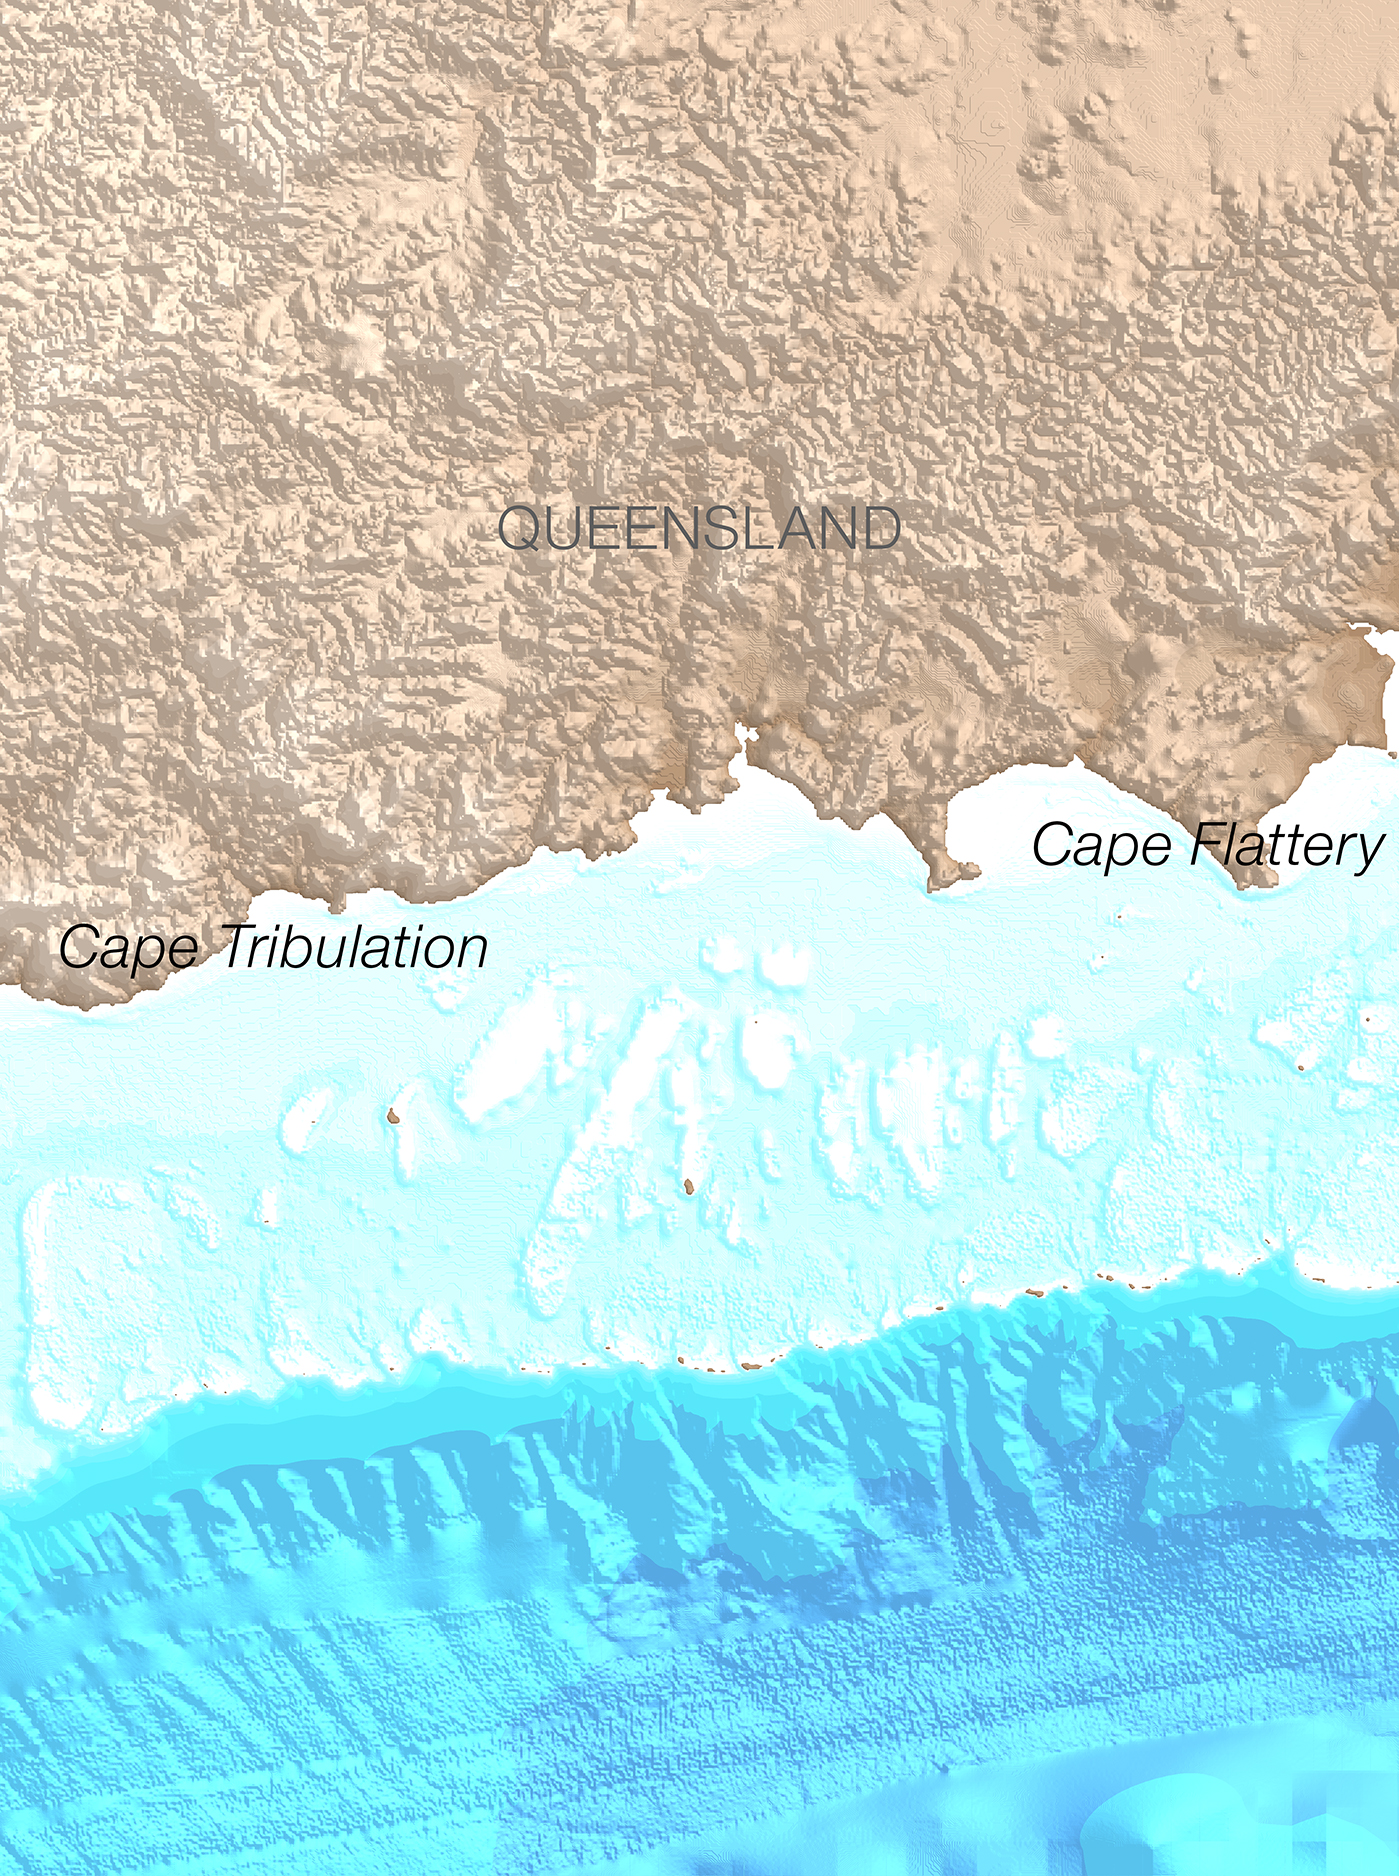 250 m bathymetry data of the Great Barrier Reef, from Cape Tribulation to Cape Flattery